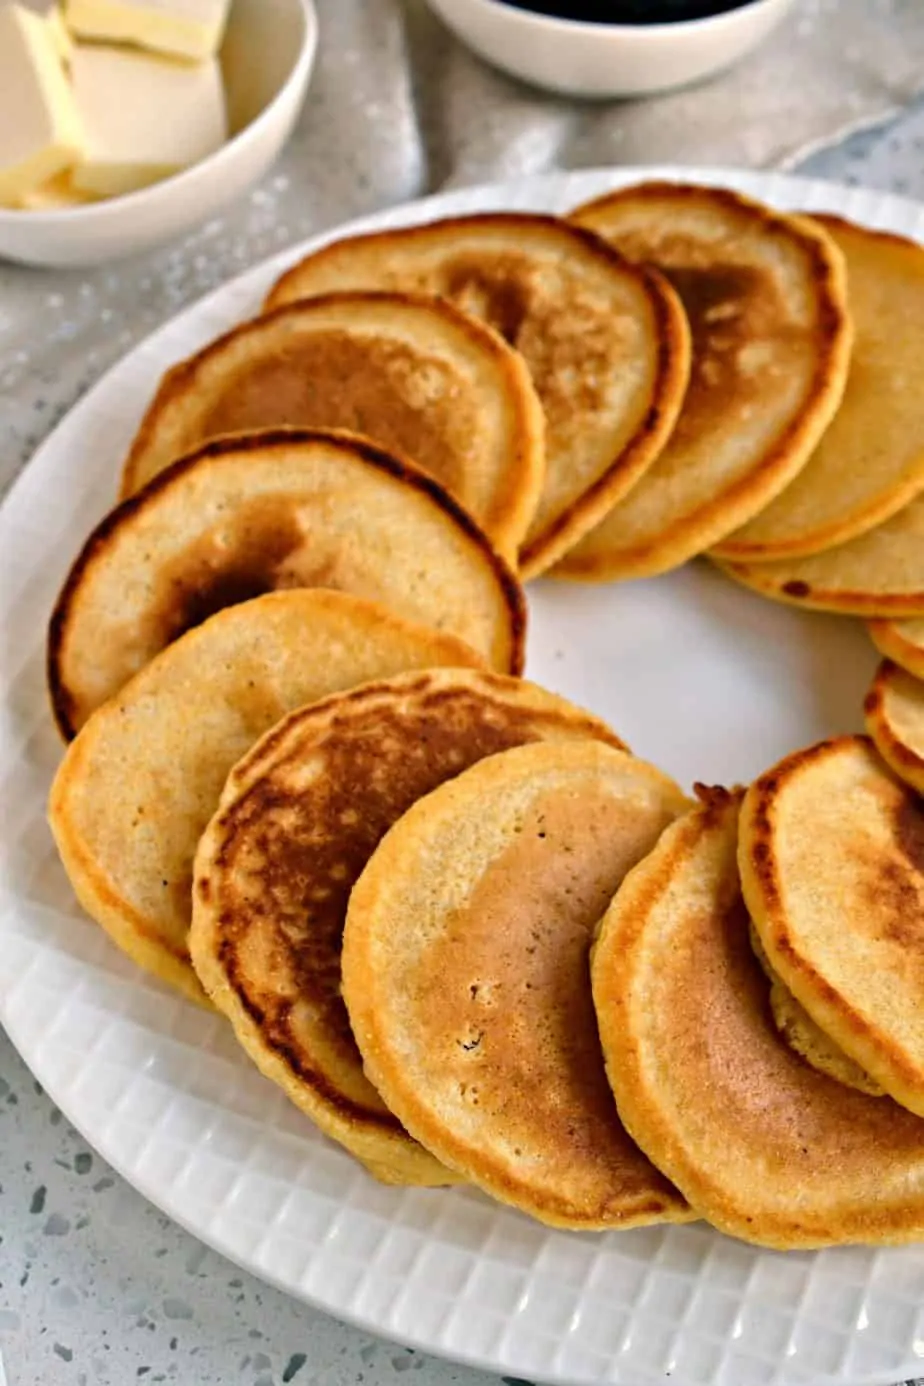 Cornbread lovers consider yourself warned because these little Johnny Cakes (also known as hoe cakes) are so tasty.